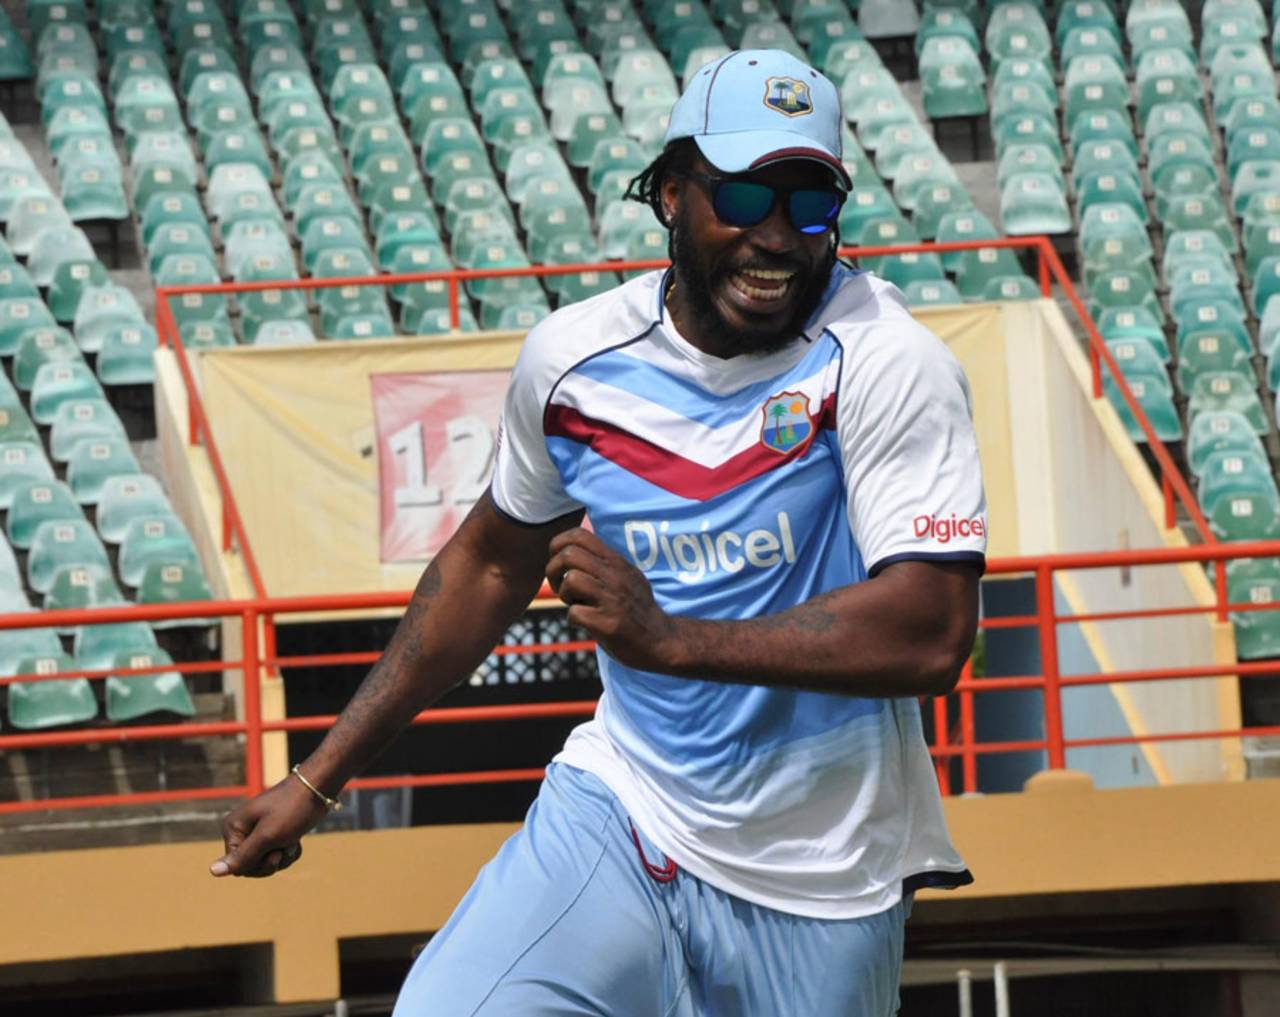 Chris Gayle trains ahead of the series against Pakistan, Providence, July 13, 2013 